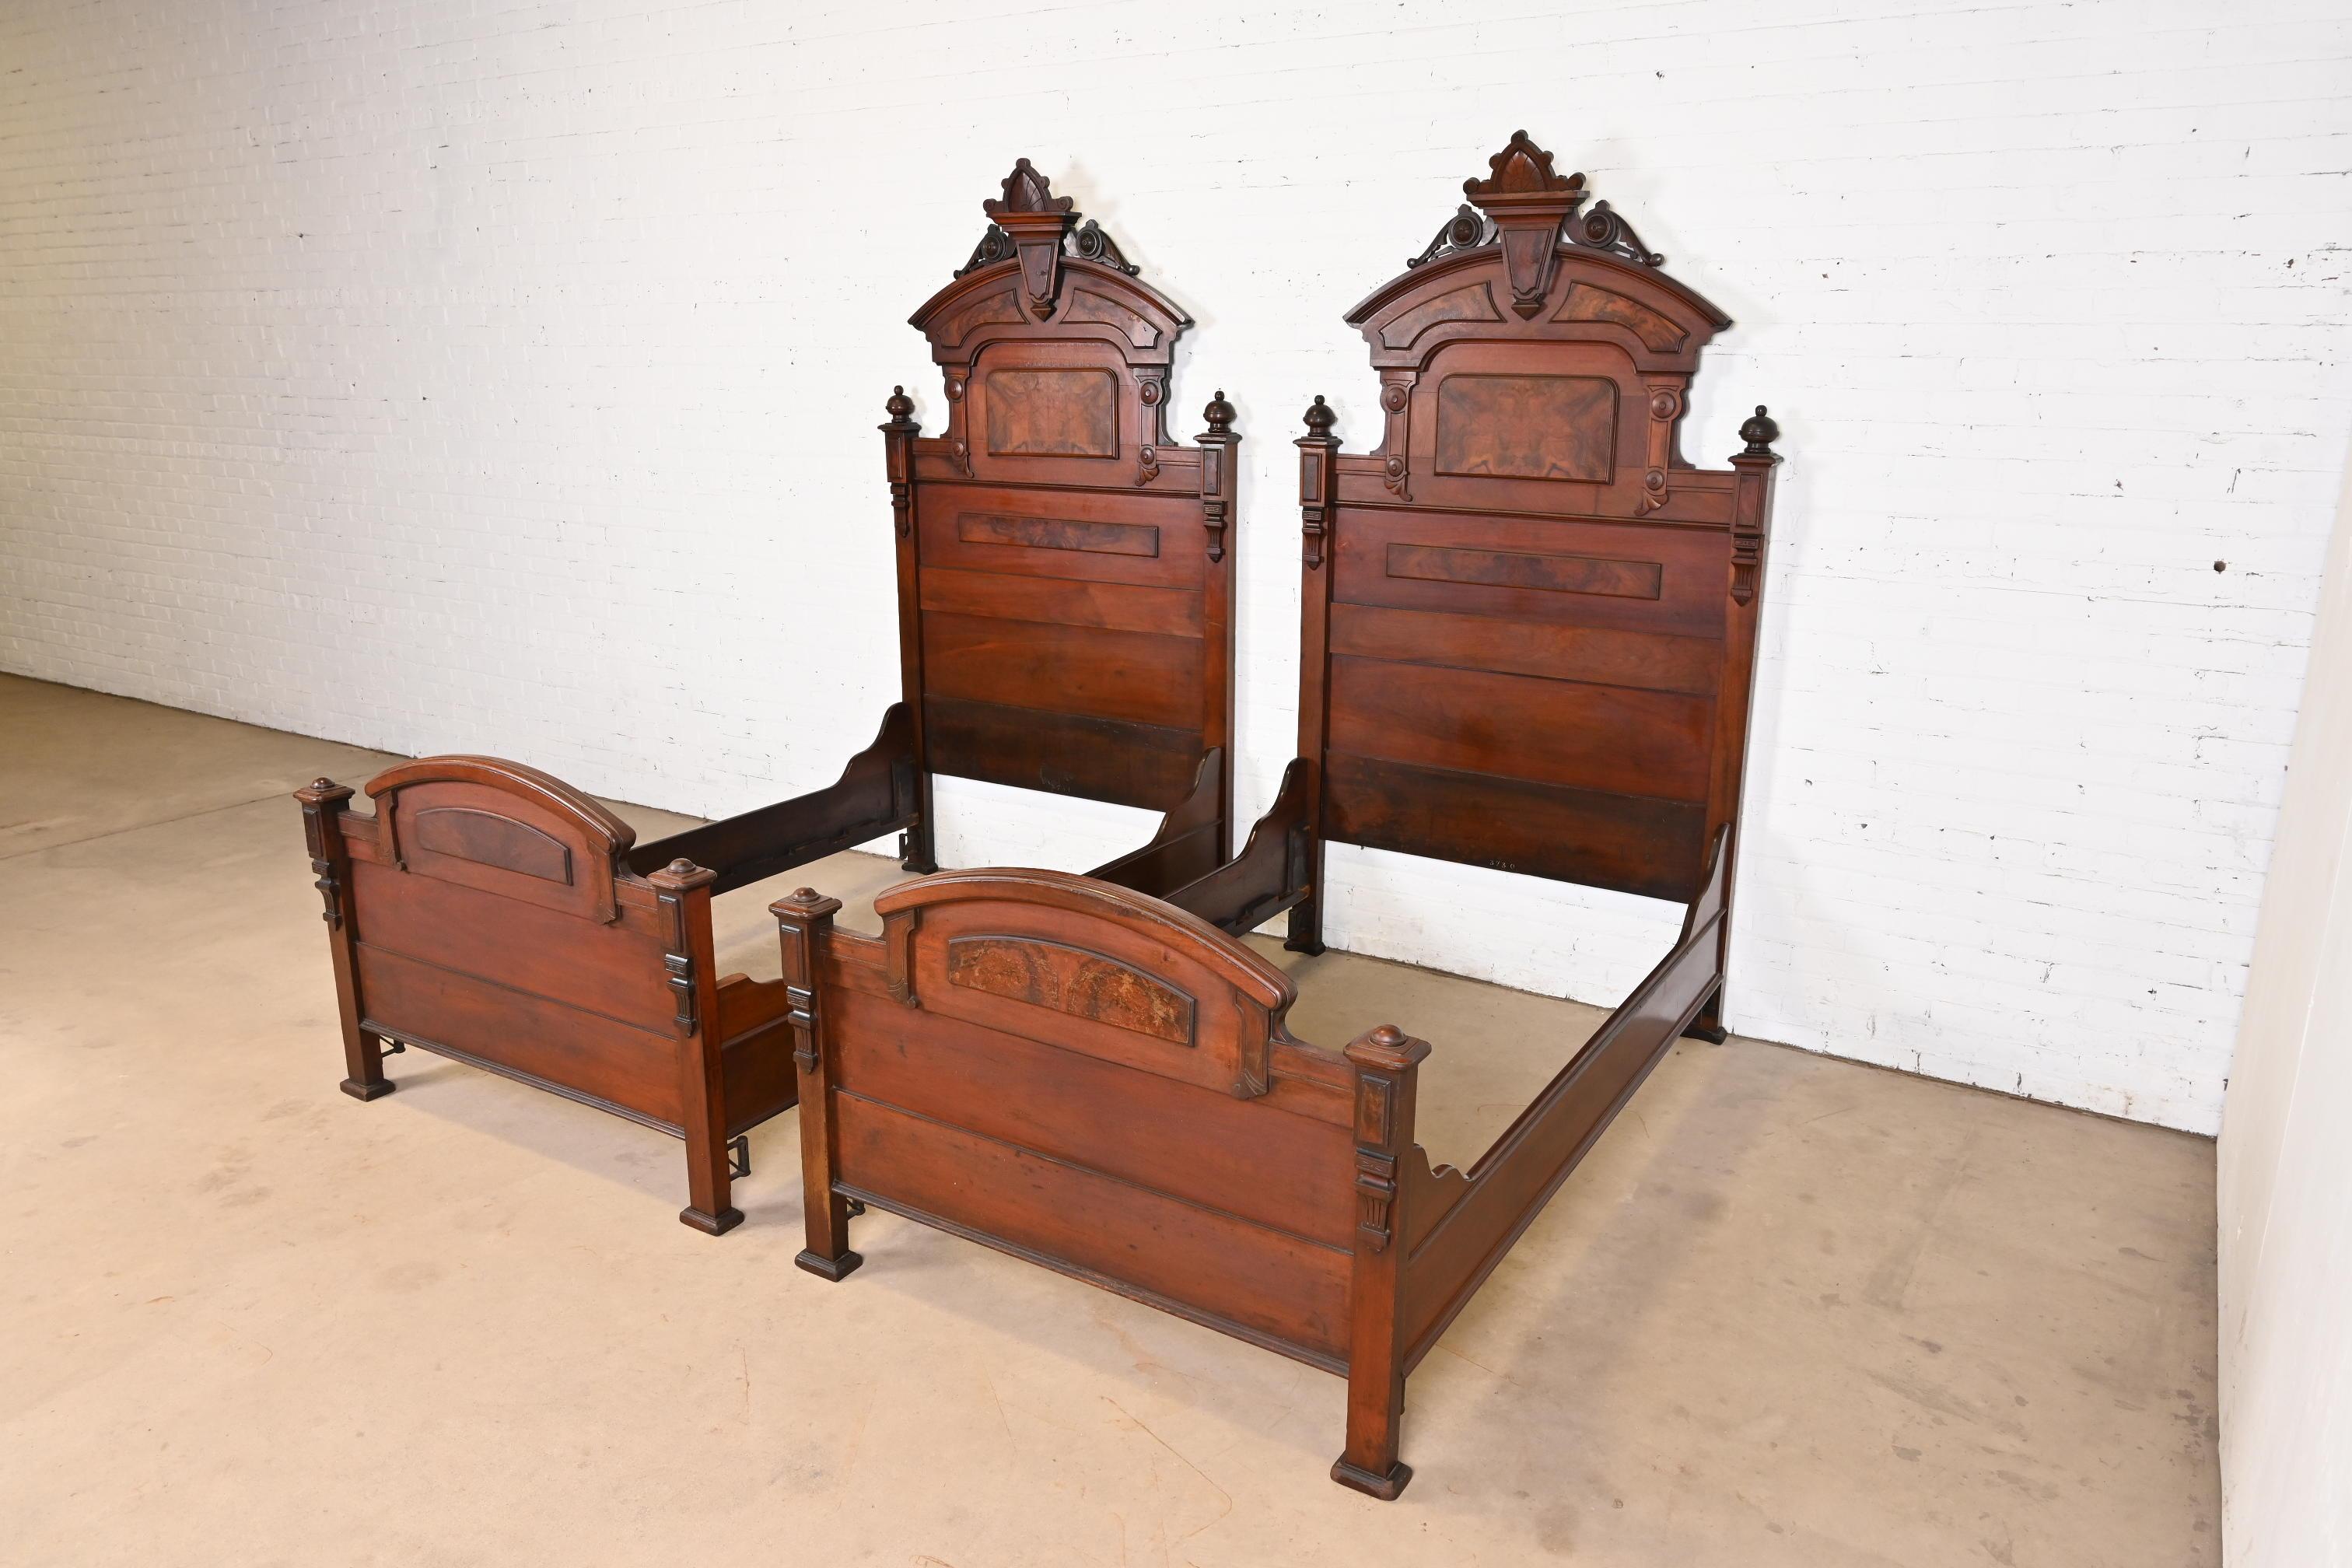 A rare and outstanding pair of monumental antique Eastlake Victorian twin size bed frames

In the manner of Herter Brothers

USA, Circa 1880s

Carved solid walnut, with burled walnut panels.

Each measures: 48